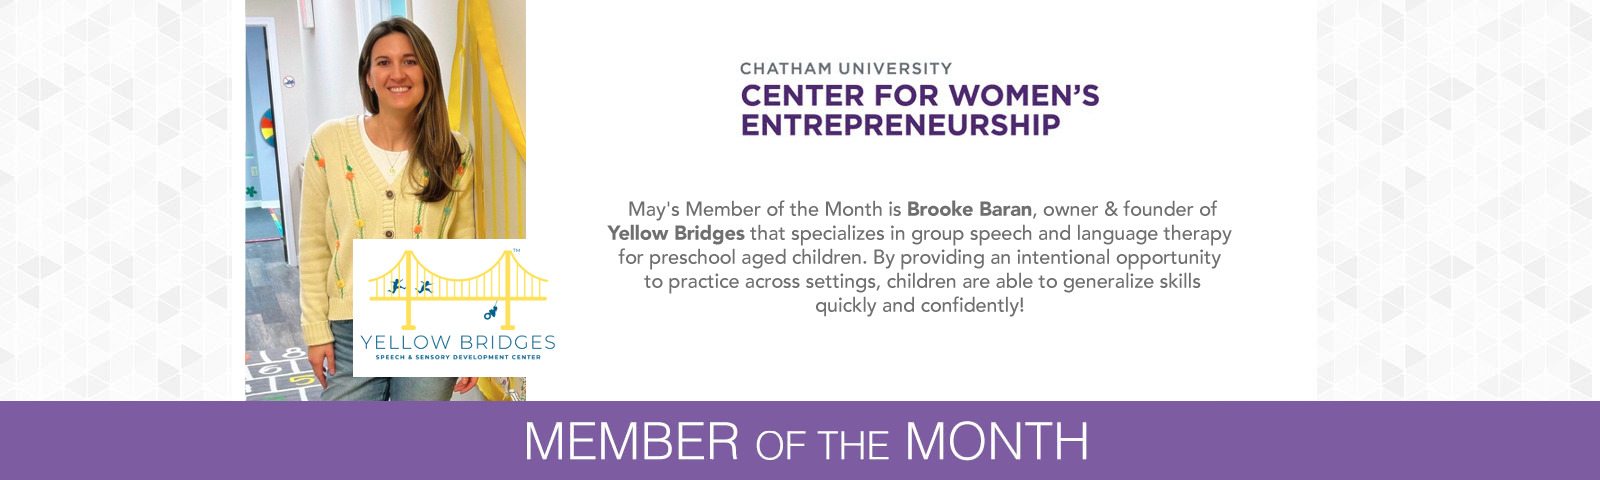 The May Member of the Month is Brook Baran, owner & founder of Yellow Bridges that specializes in group speech and language therapy for preschool aged children. By providing an intentional opportunity to practice across settings, children are able to generalize skills quickly and confidently!